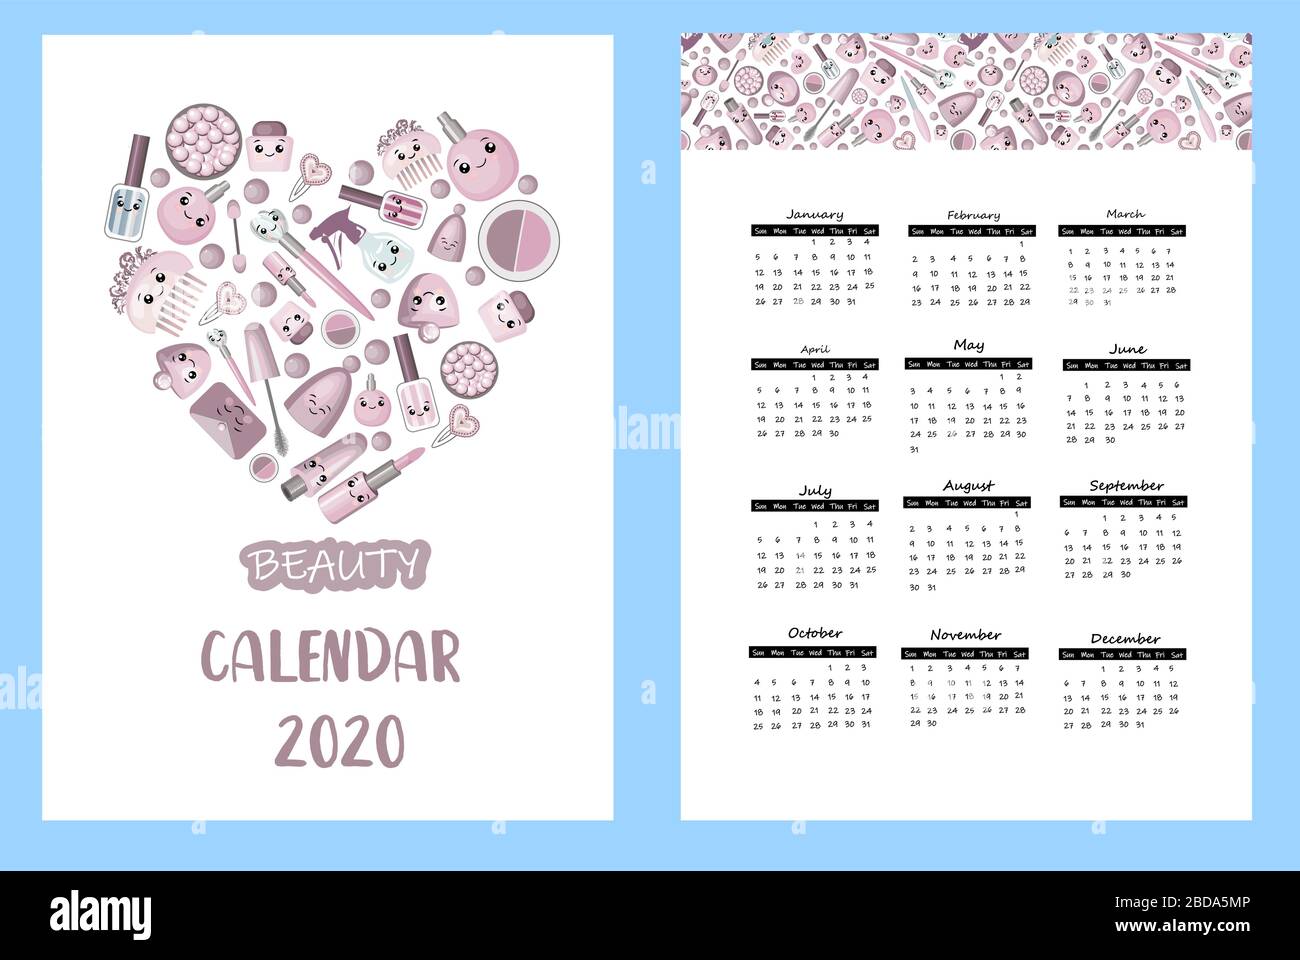 Calendar 2020. beauty and spa. Banner for a beauty salon or hairdresser. Lipstick, perfume, mascara, comb. Rosy tender color. White background. Stock Vector